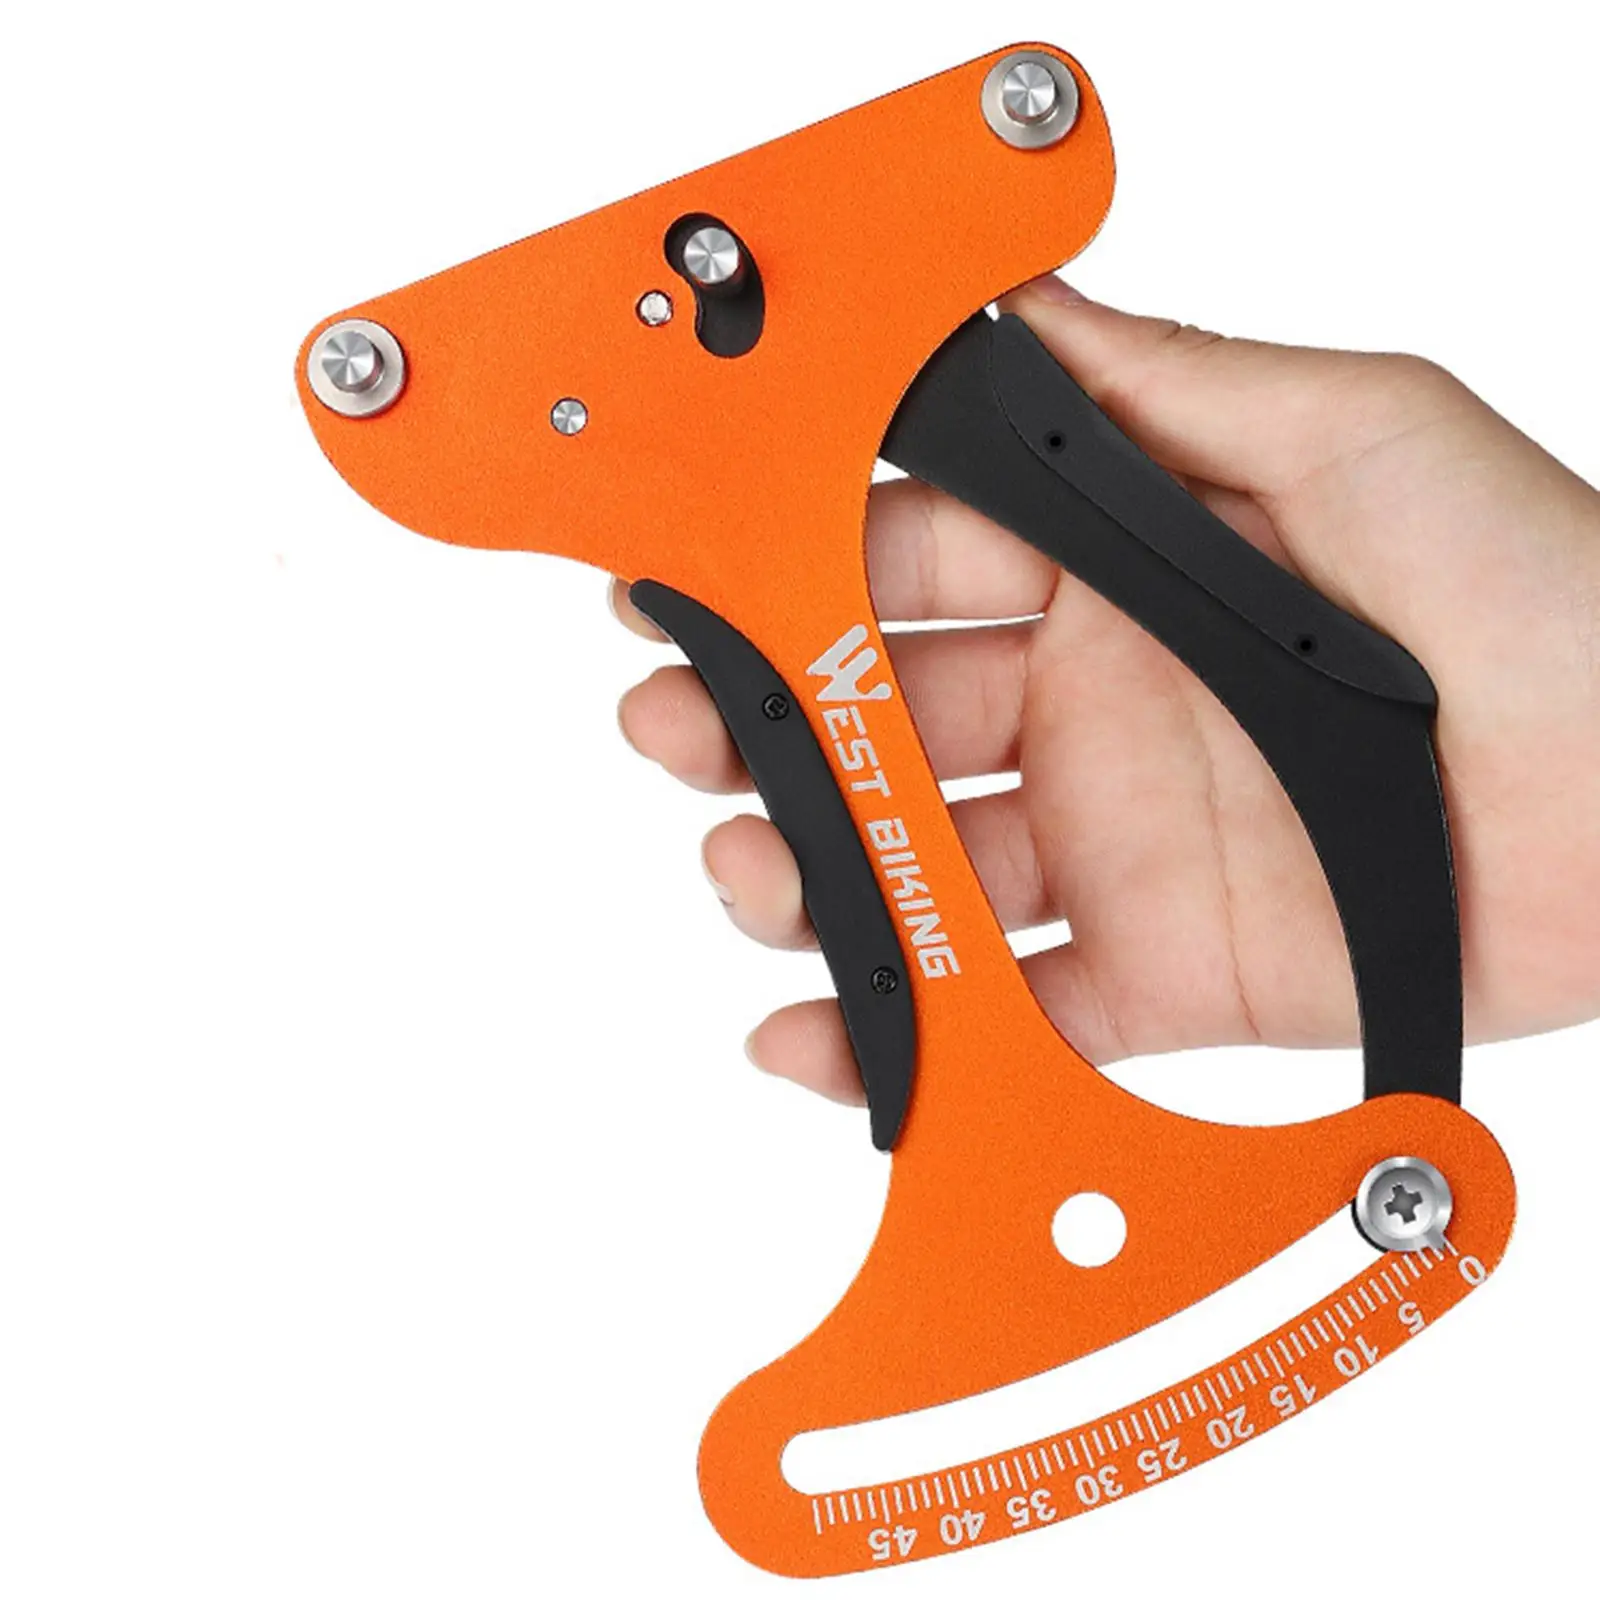  Wheel Spoke Tension Meter Measurement Tool , Accurately And Reliably